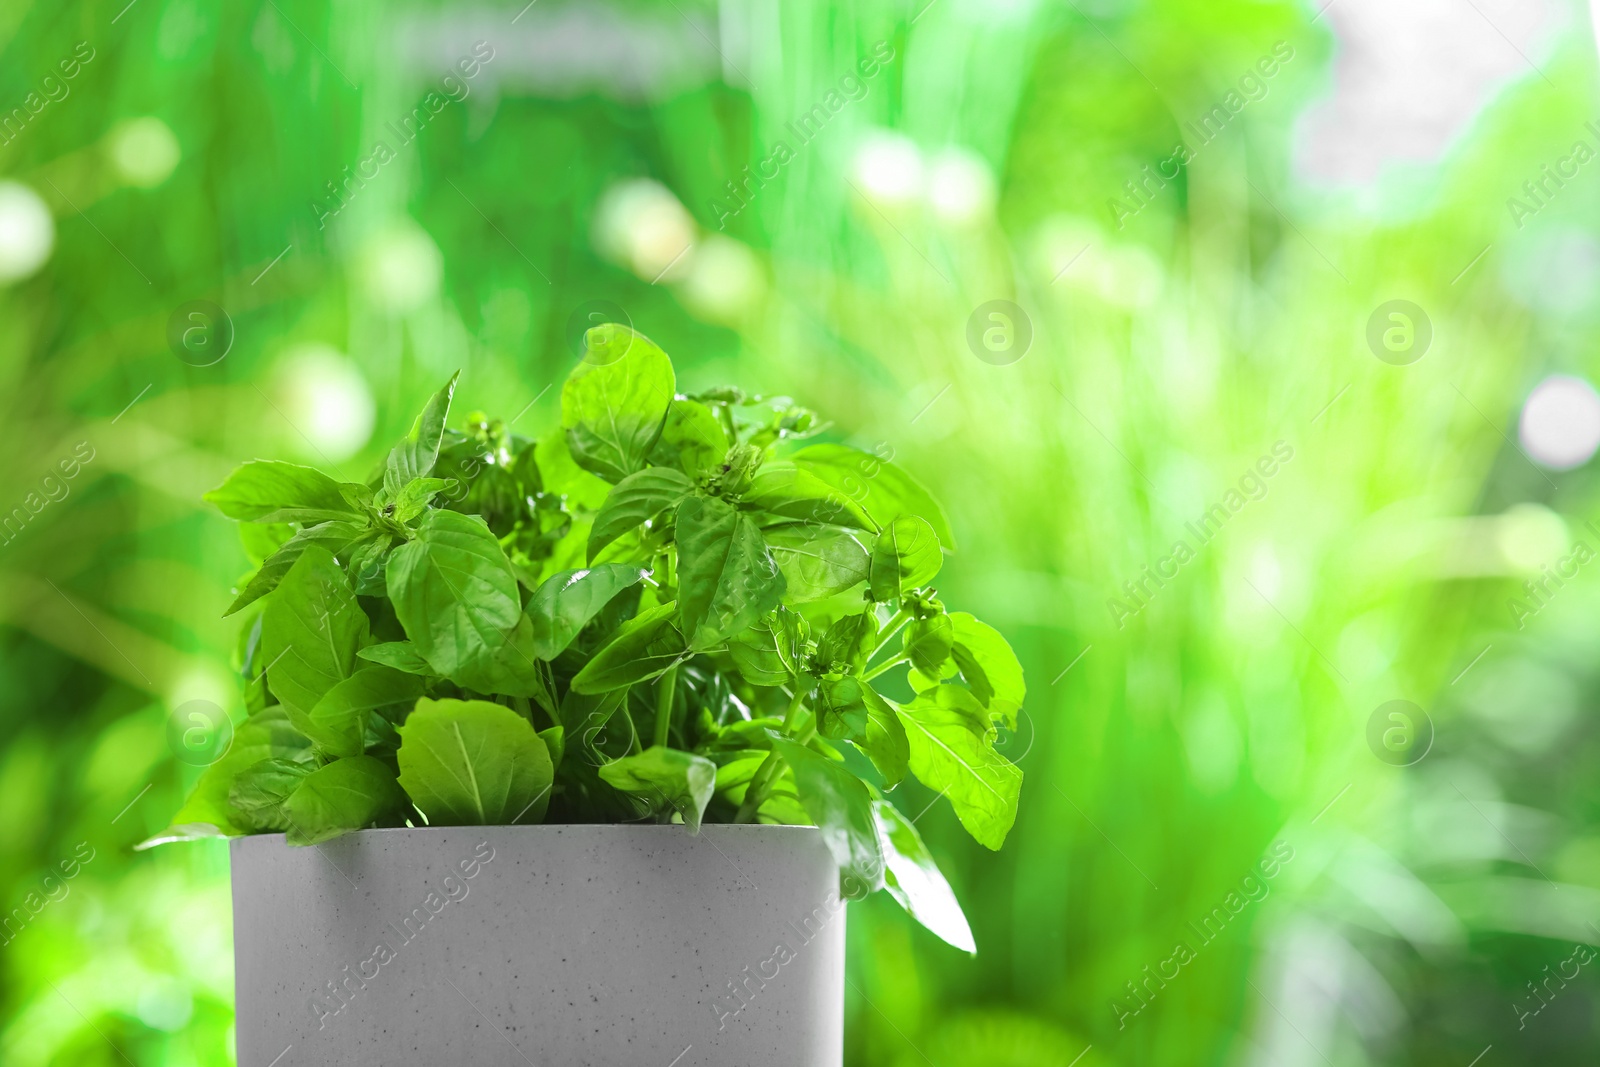 Photo of Green basil plant in pot on blurred background